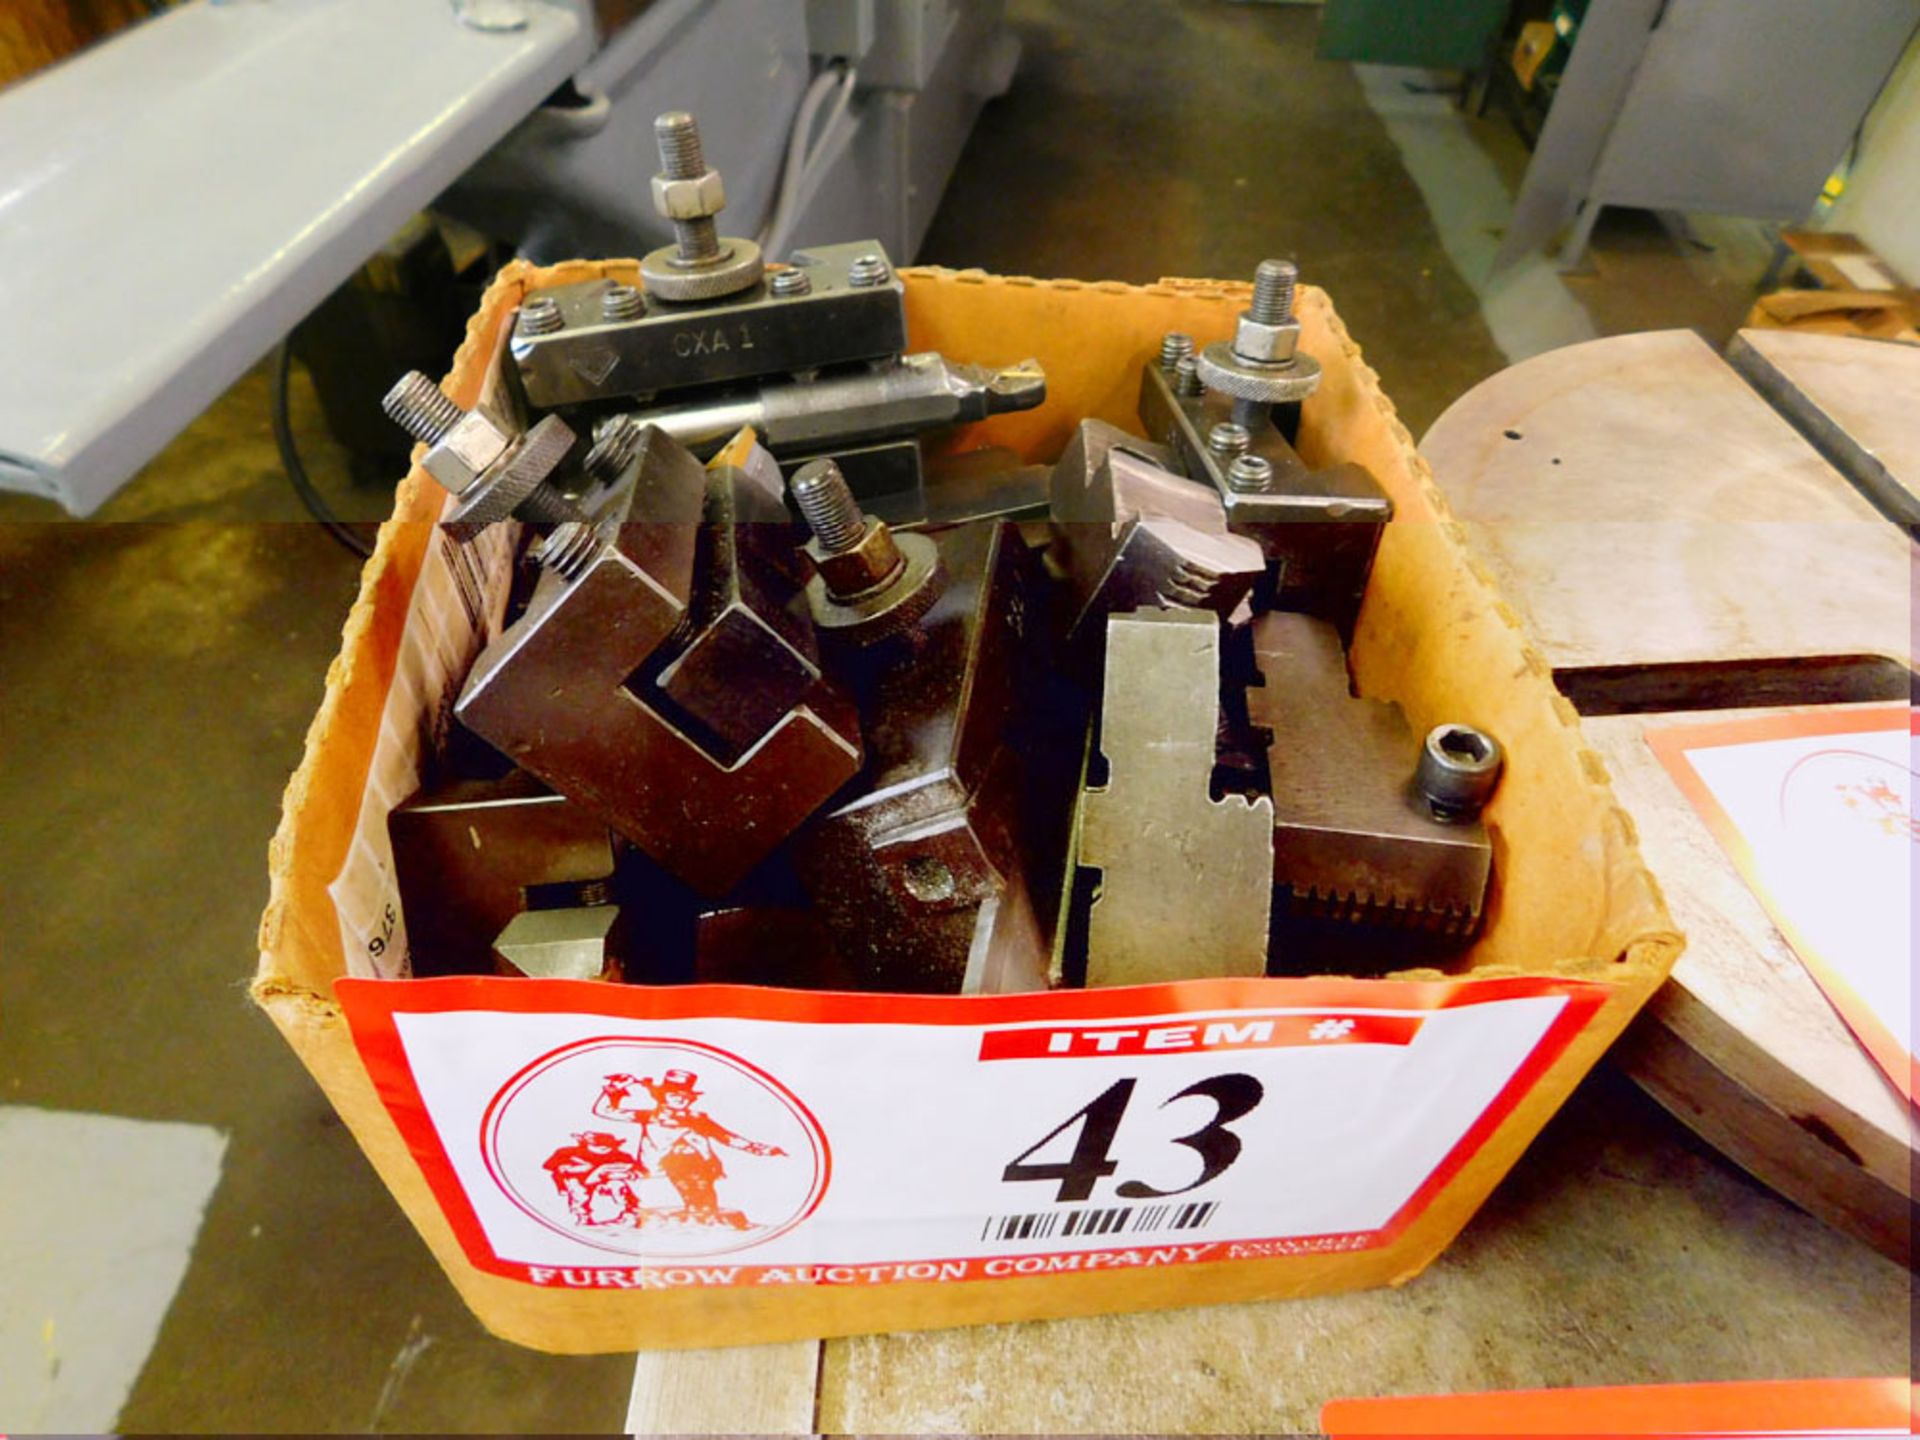 Contents Box, Lathe Cutters, Lathe Jaws, Chuck Jaws, Tool Holders, etc.